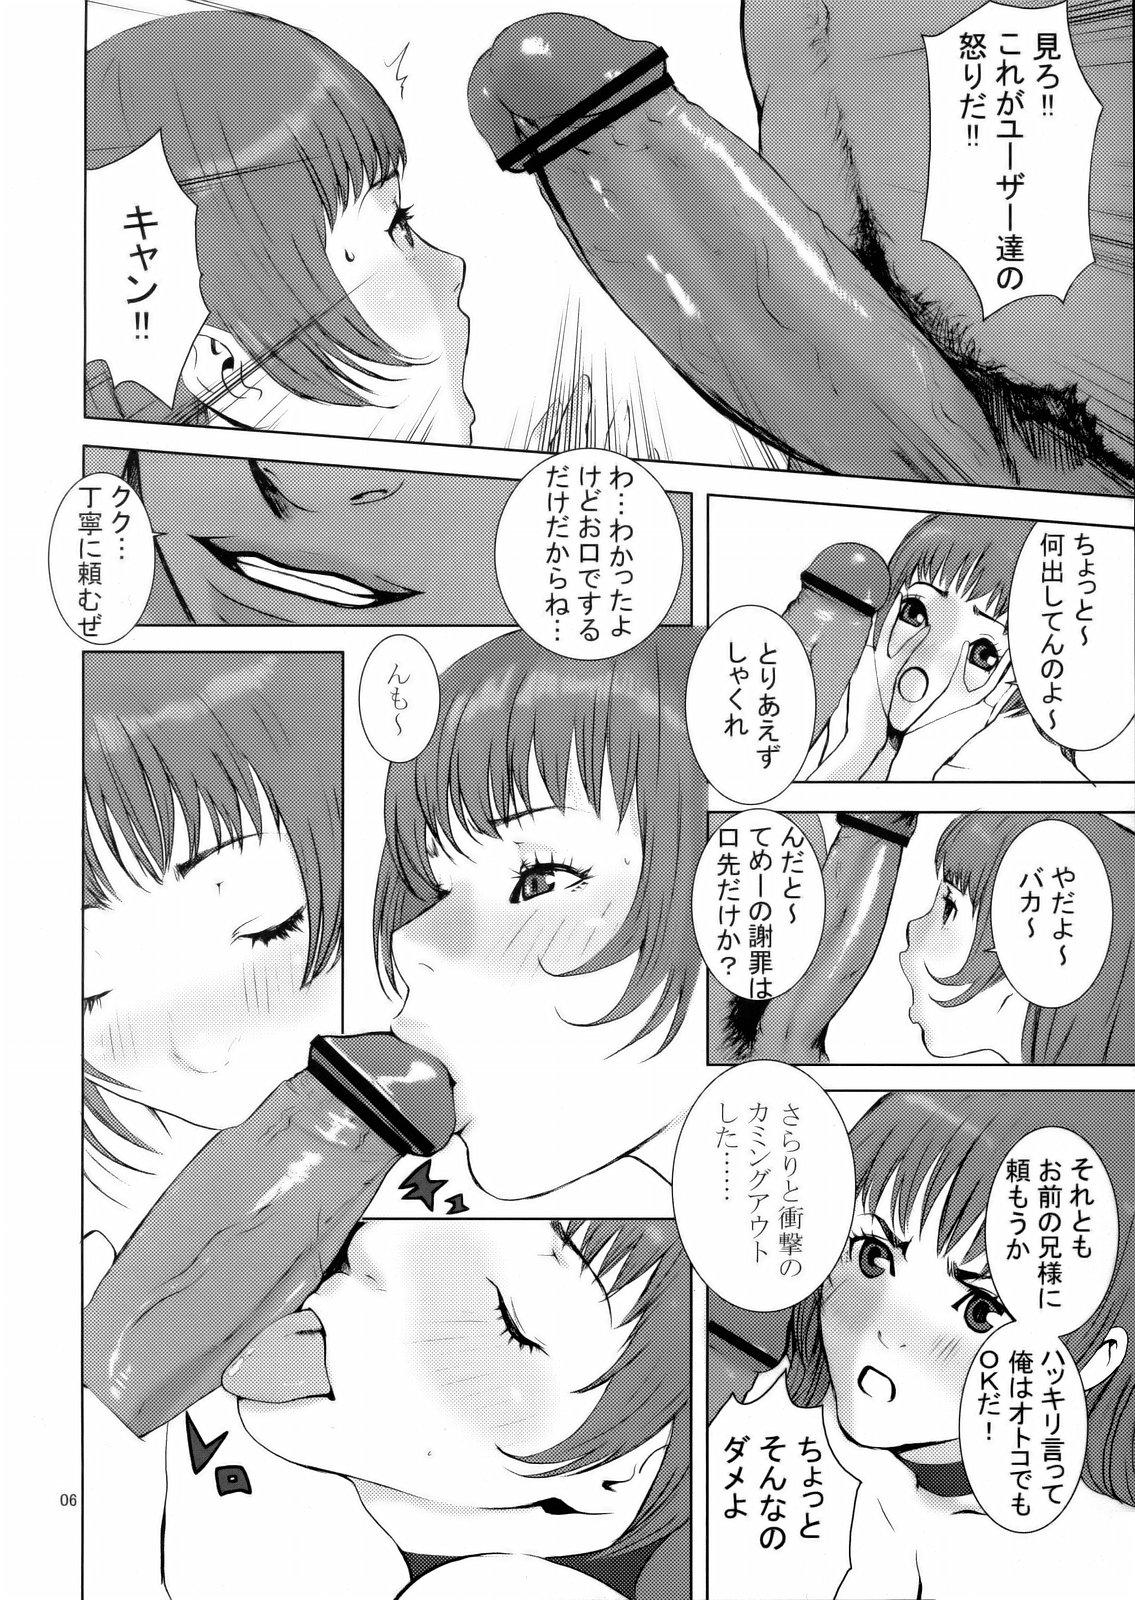 Eating Pussy KASUMI CHANCO 360 - Dead or alive Baile - Page 5